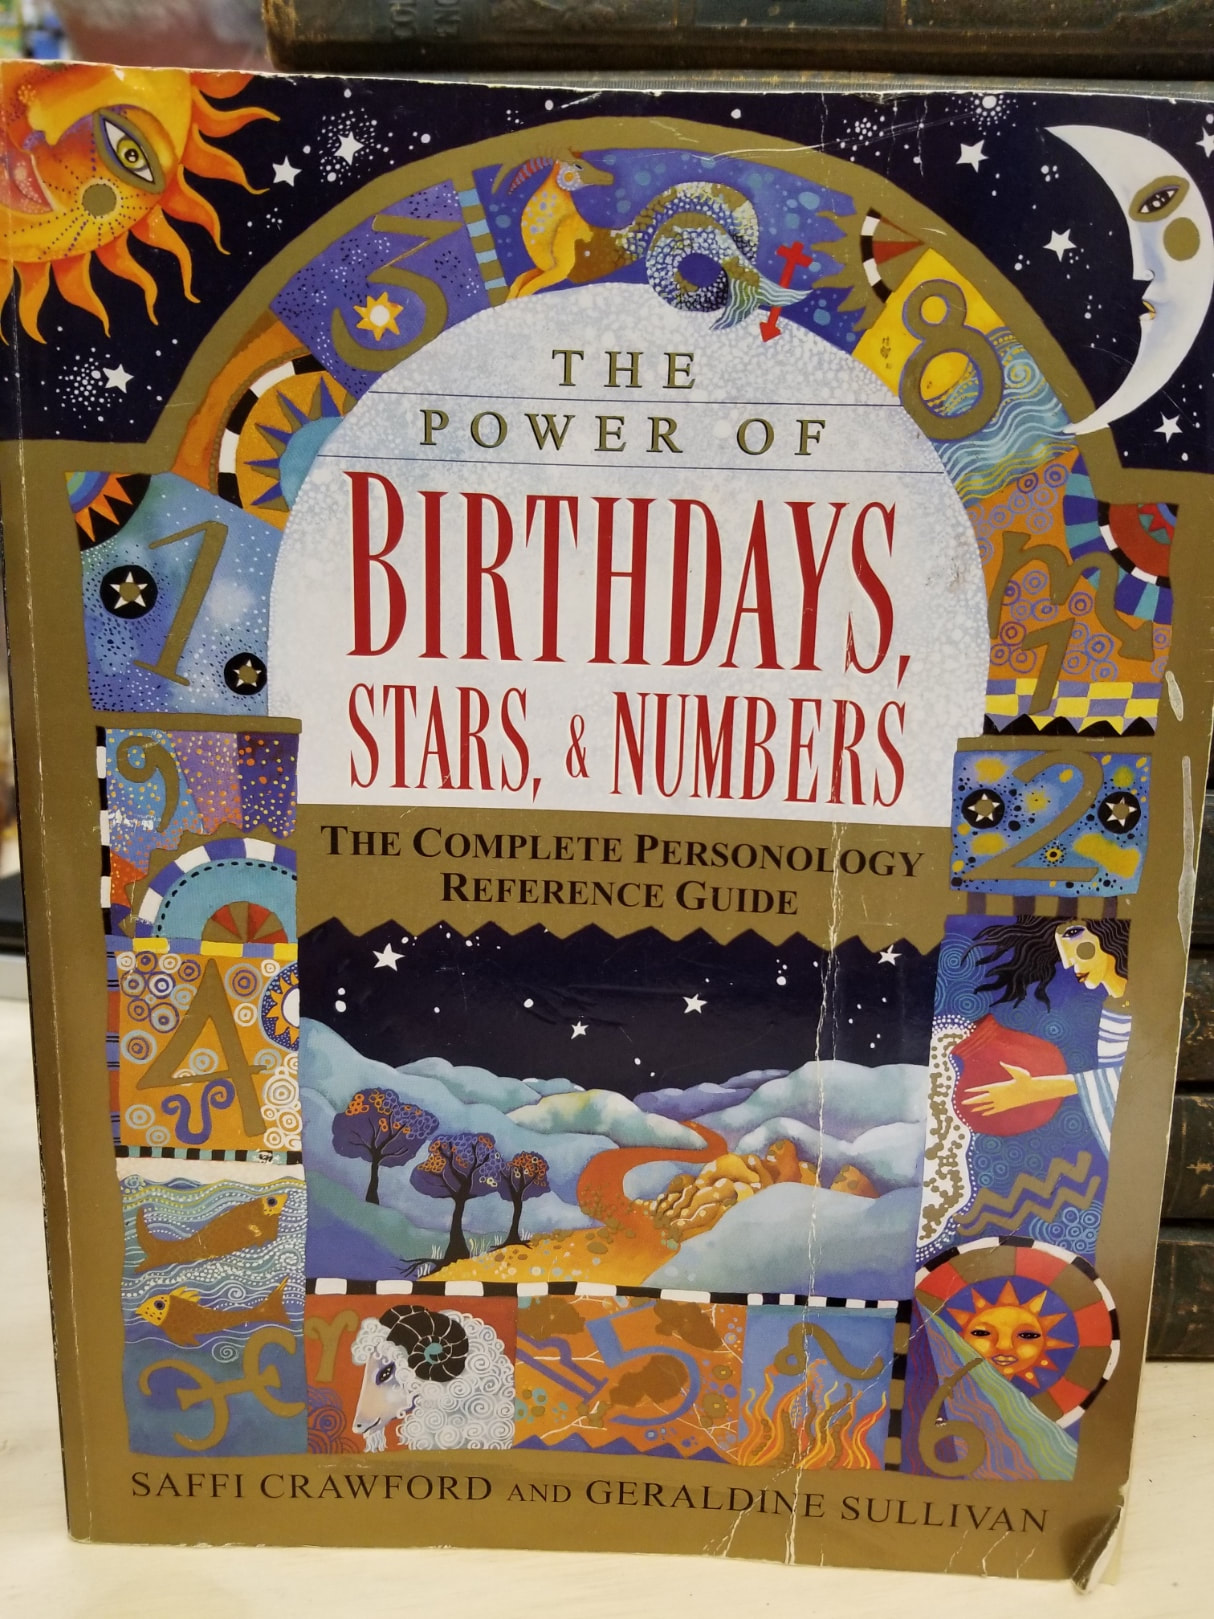 The Power of Birthdays, Stars and Numbers by Crawford and Sullivan